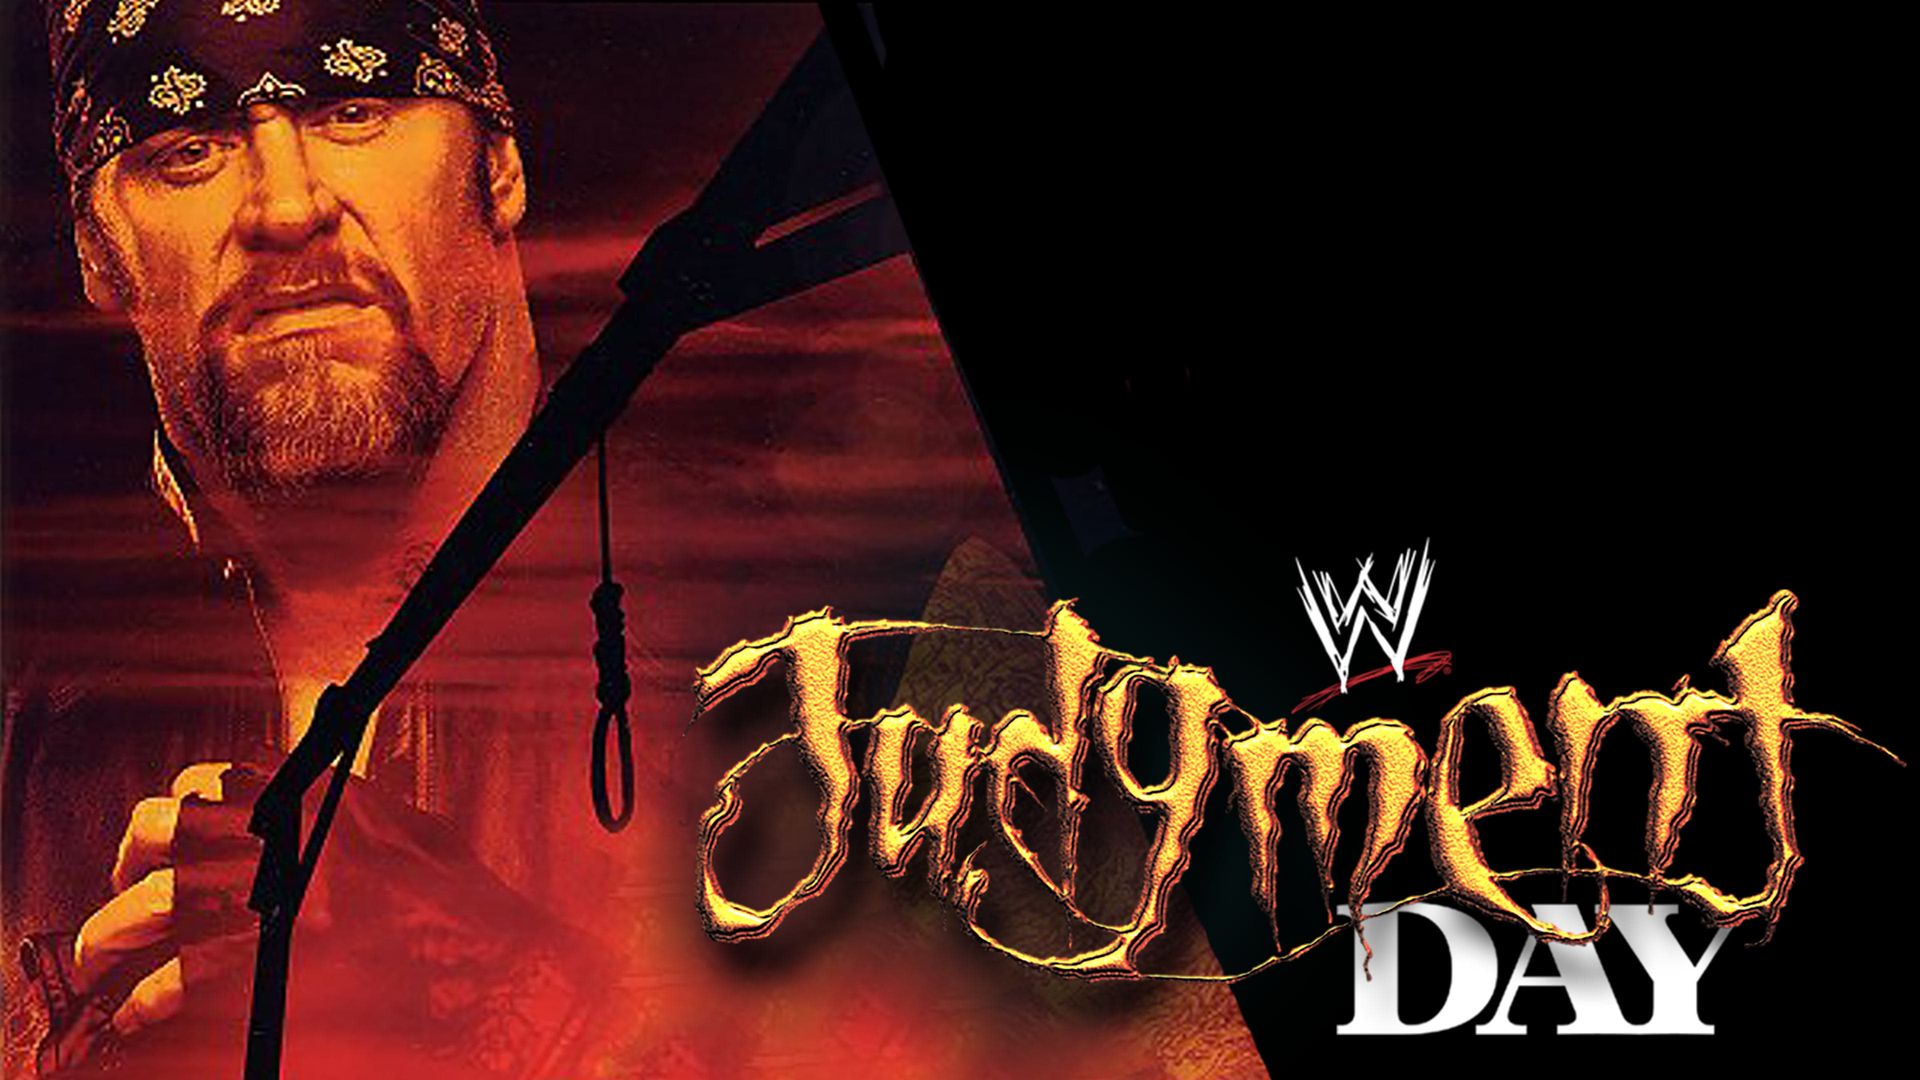 WWE Judgment Day background